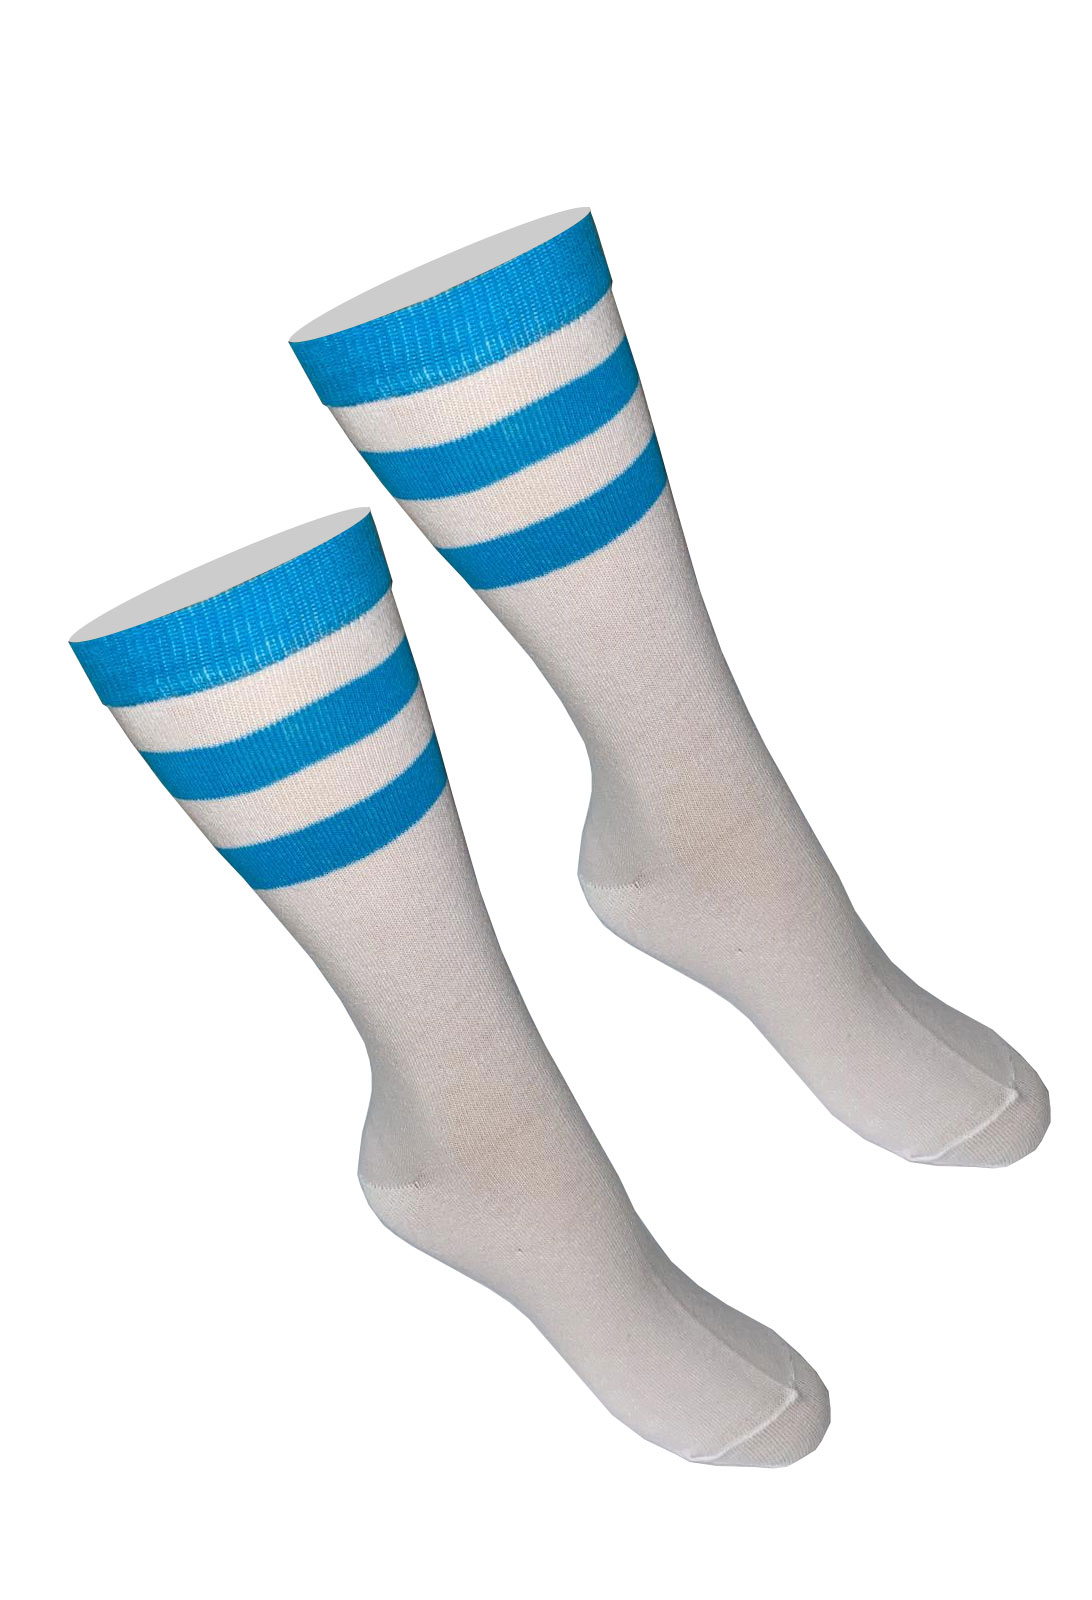 Crazy Chick 3 Stripe Referee White With Turquoise Ankle Socks(12 Pairs)